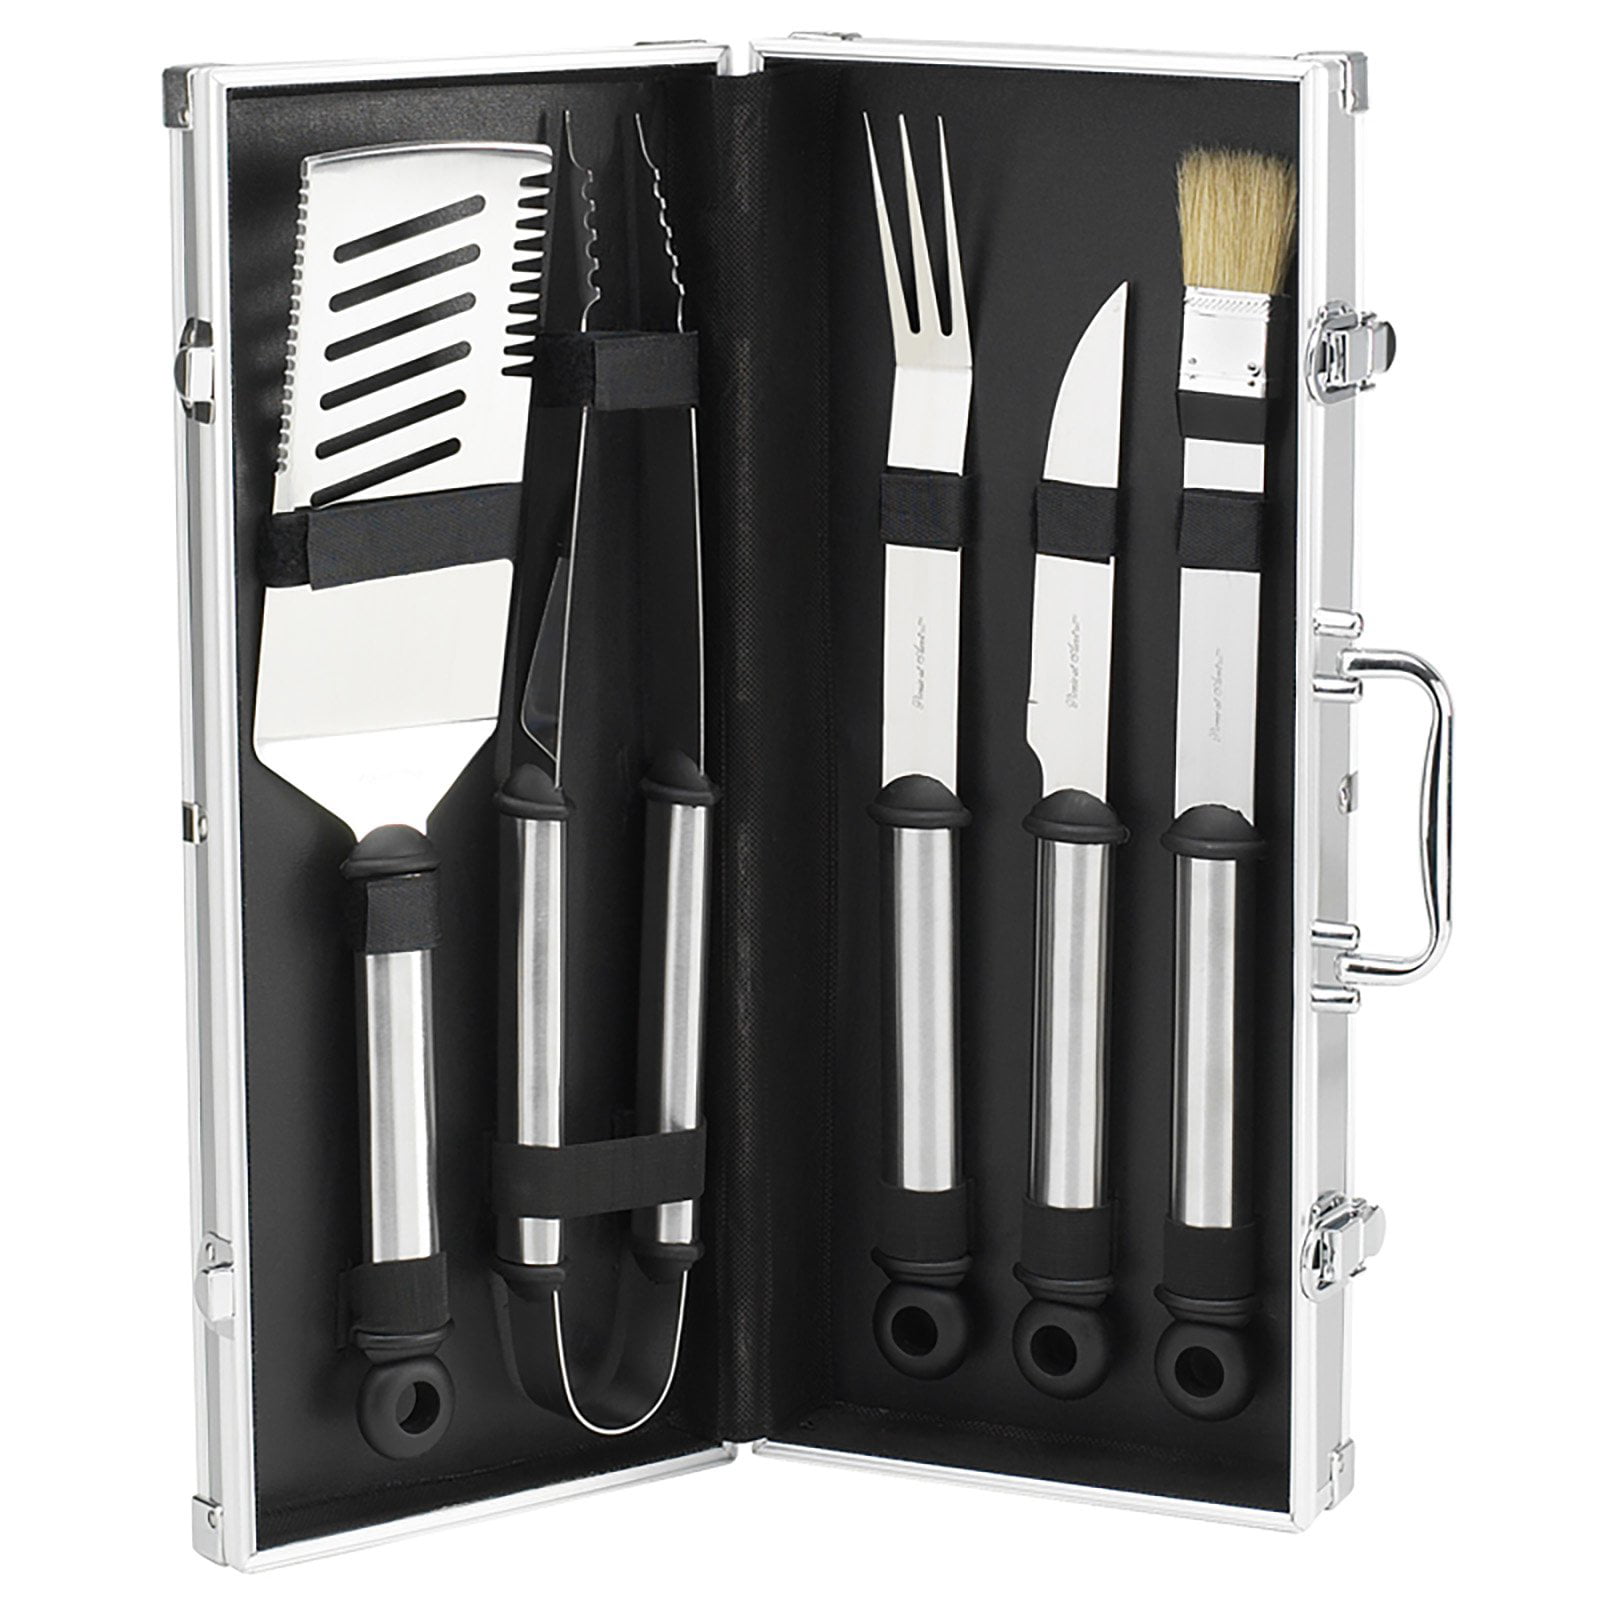 Eller metal Gemme Picnic at Ascot SBS 5 Piece BBQ Stainless Grill Tools Set with Case -  Walmart.com